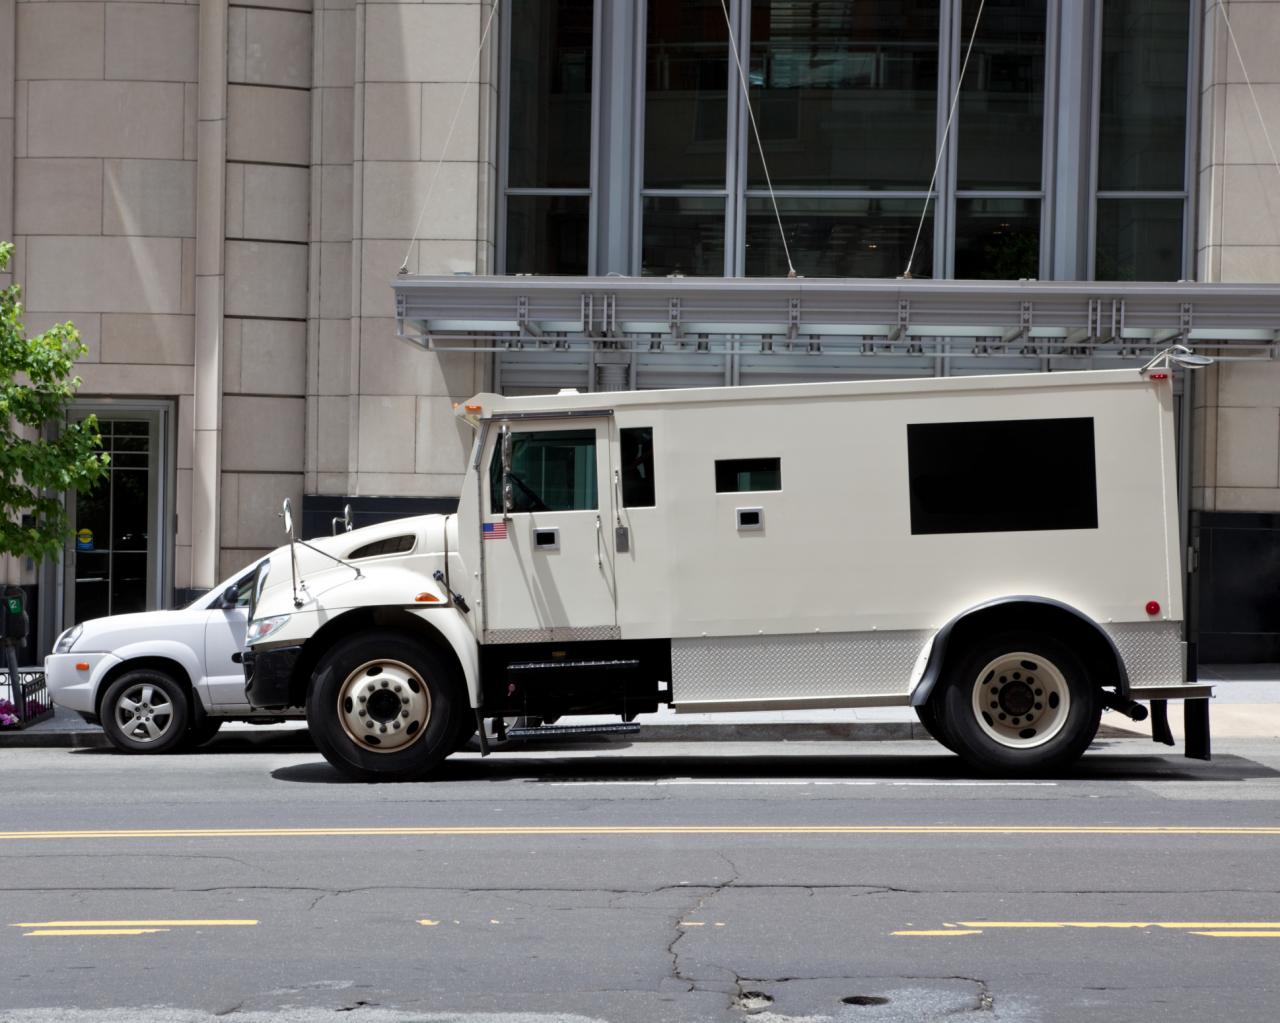 How to get a job driving an armored truck